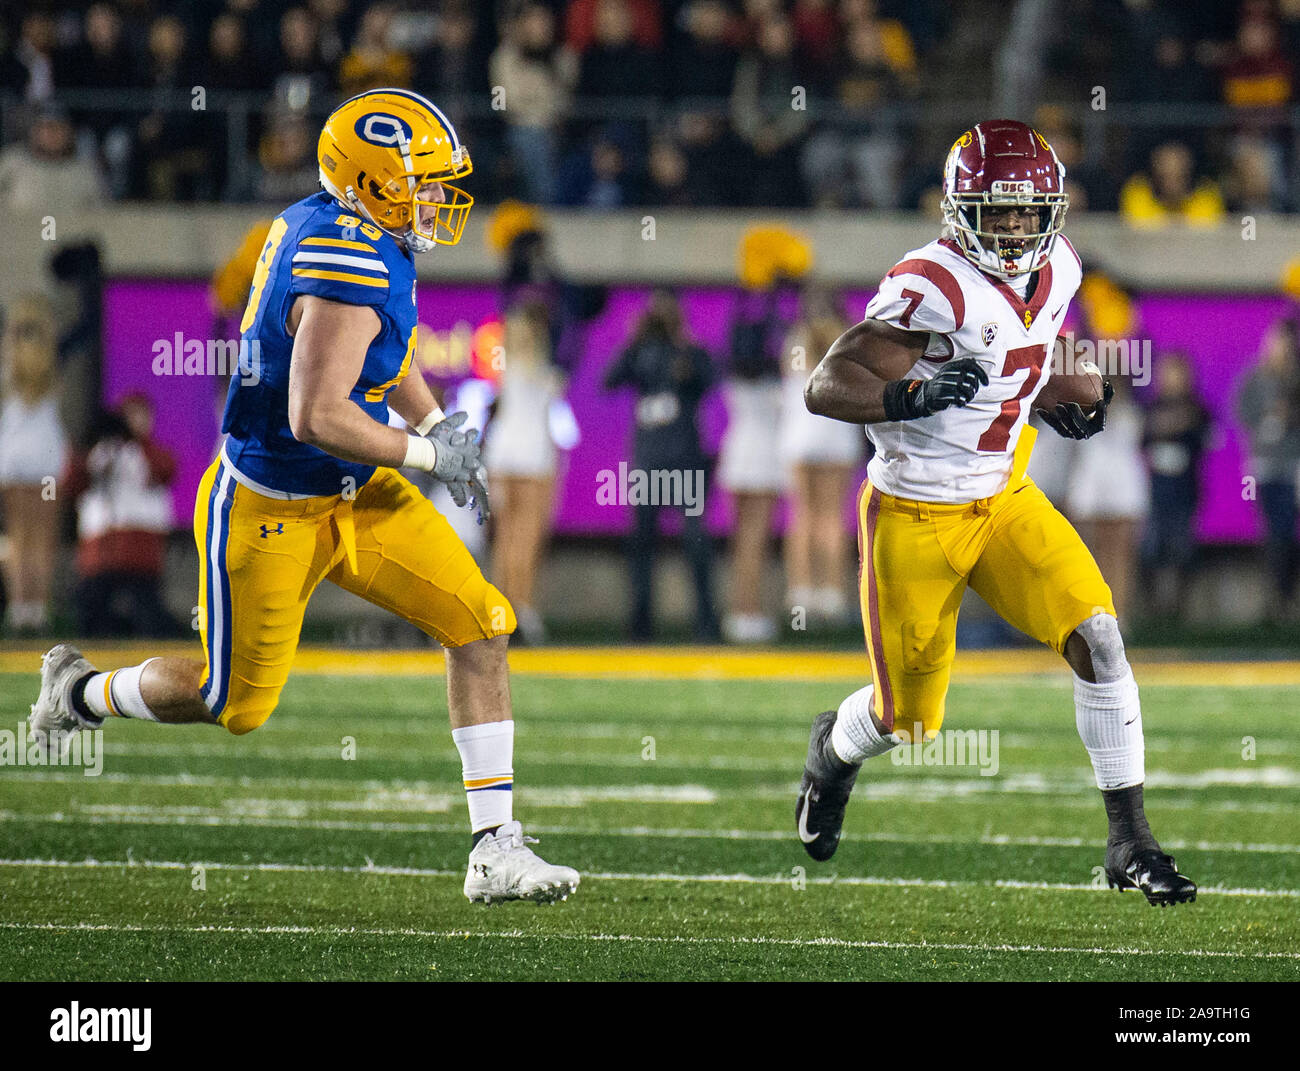 California Memorial Stadium. 16th Nov, 2019. CA U.S.A. USC running back Stephen Carr(7) breaks to the outside for a long run during the NCAA Football game between USC Trojans and the California Golden Bears 41-17 win at California Memorial Stadium. Thurman James/CSM/Alamy Live News Stock Photo